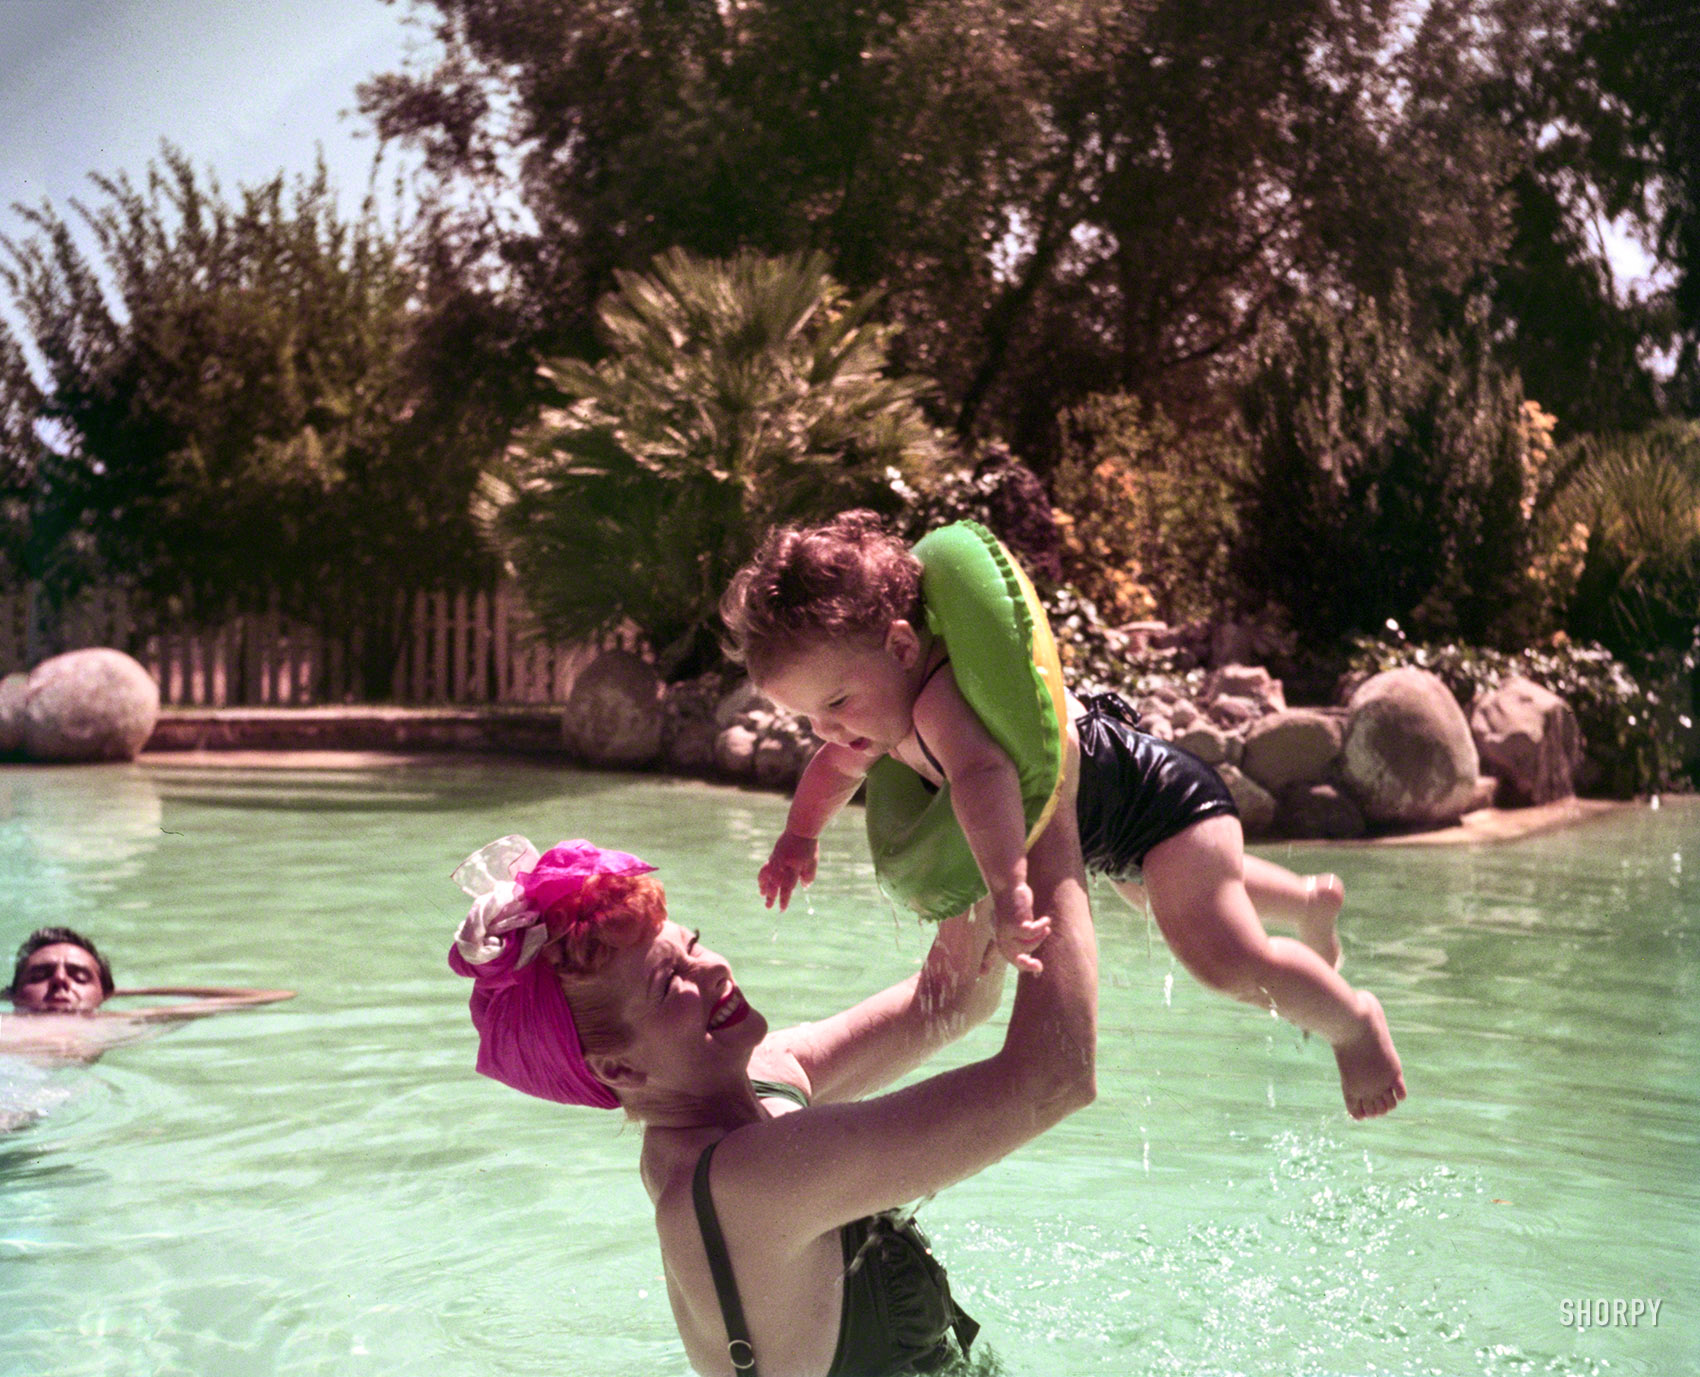 August 1952. "Lucille Ball and Desi Arnaz with their daughter, Lucie, in swimming pool at their home in Palm Springs." Kodachrome by Charlotte Brooks for the Look magazine assignment "The Real Lucy." Happy Mother's Day from Shorpy! View full size.